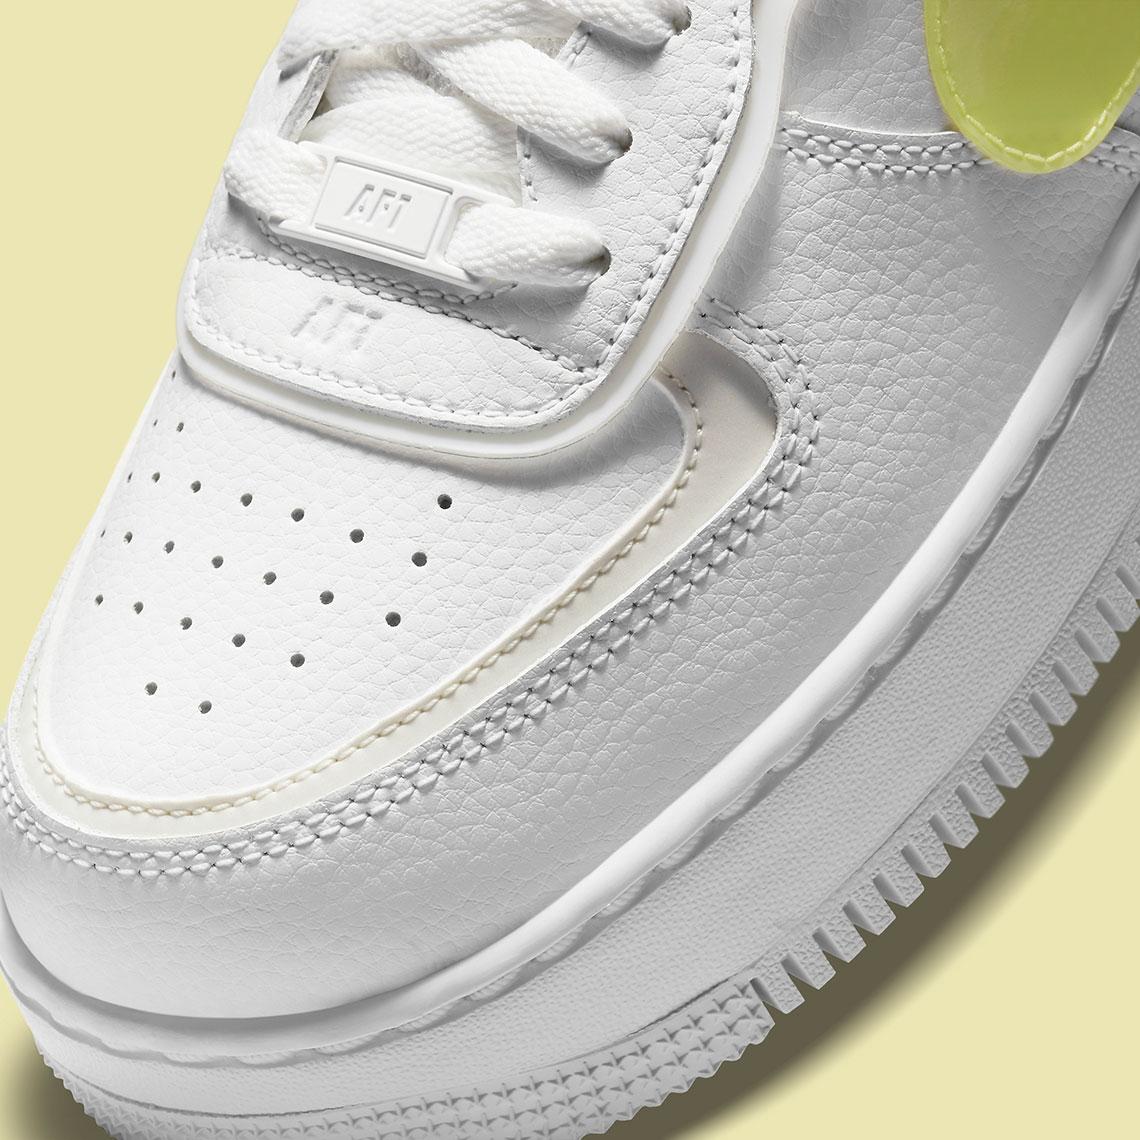 Bright Yellow Sparks This Nike WMNS Air Force 1 Shadow